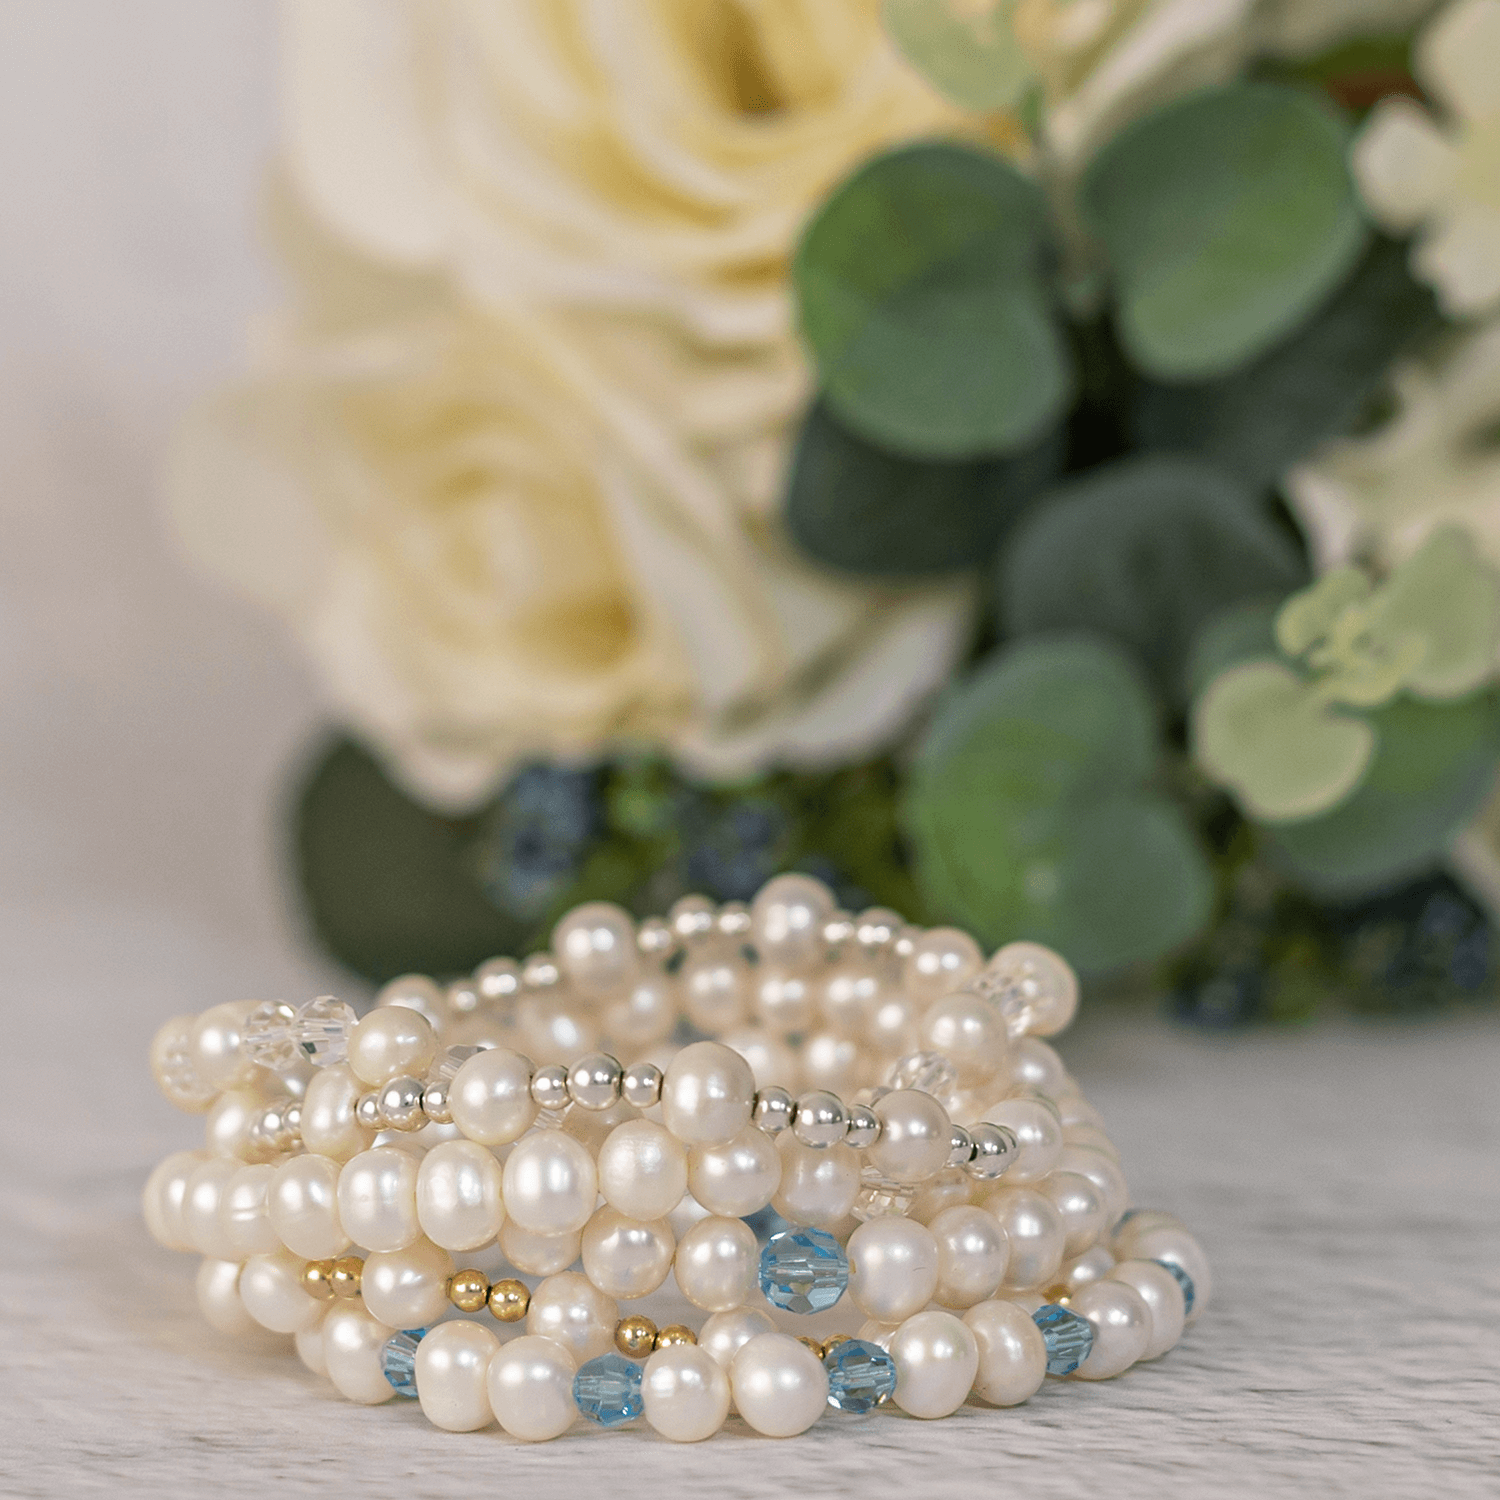  A beaded pearl bracelet perfect as bridal jewellery for a wedding, features alternating small white pearls, gold beads, and blue crystal beads elegantly sat. The bracelet rests on a light-colored surface with a backdrop of  green eucalyptus leaves.